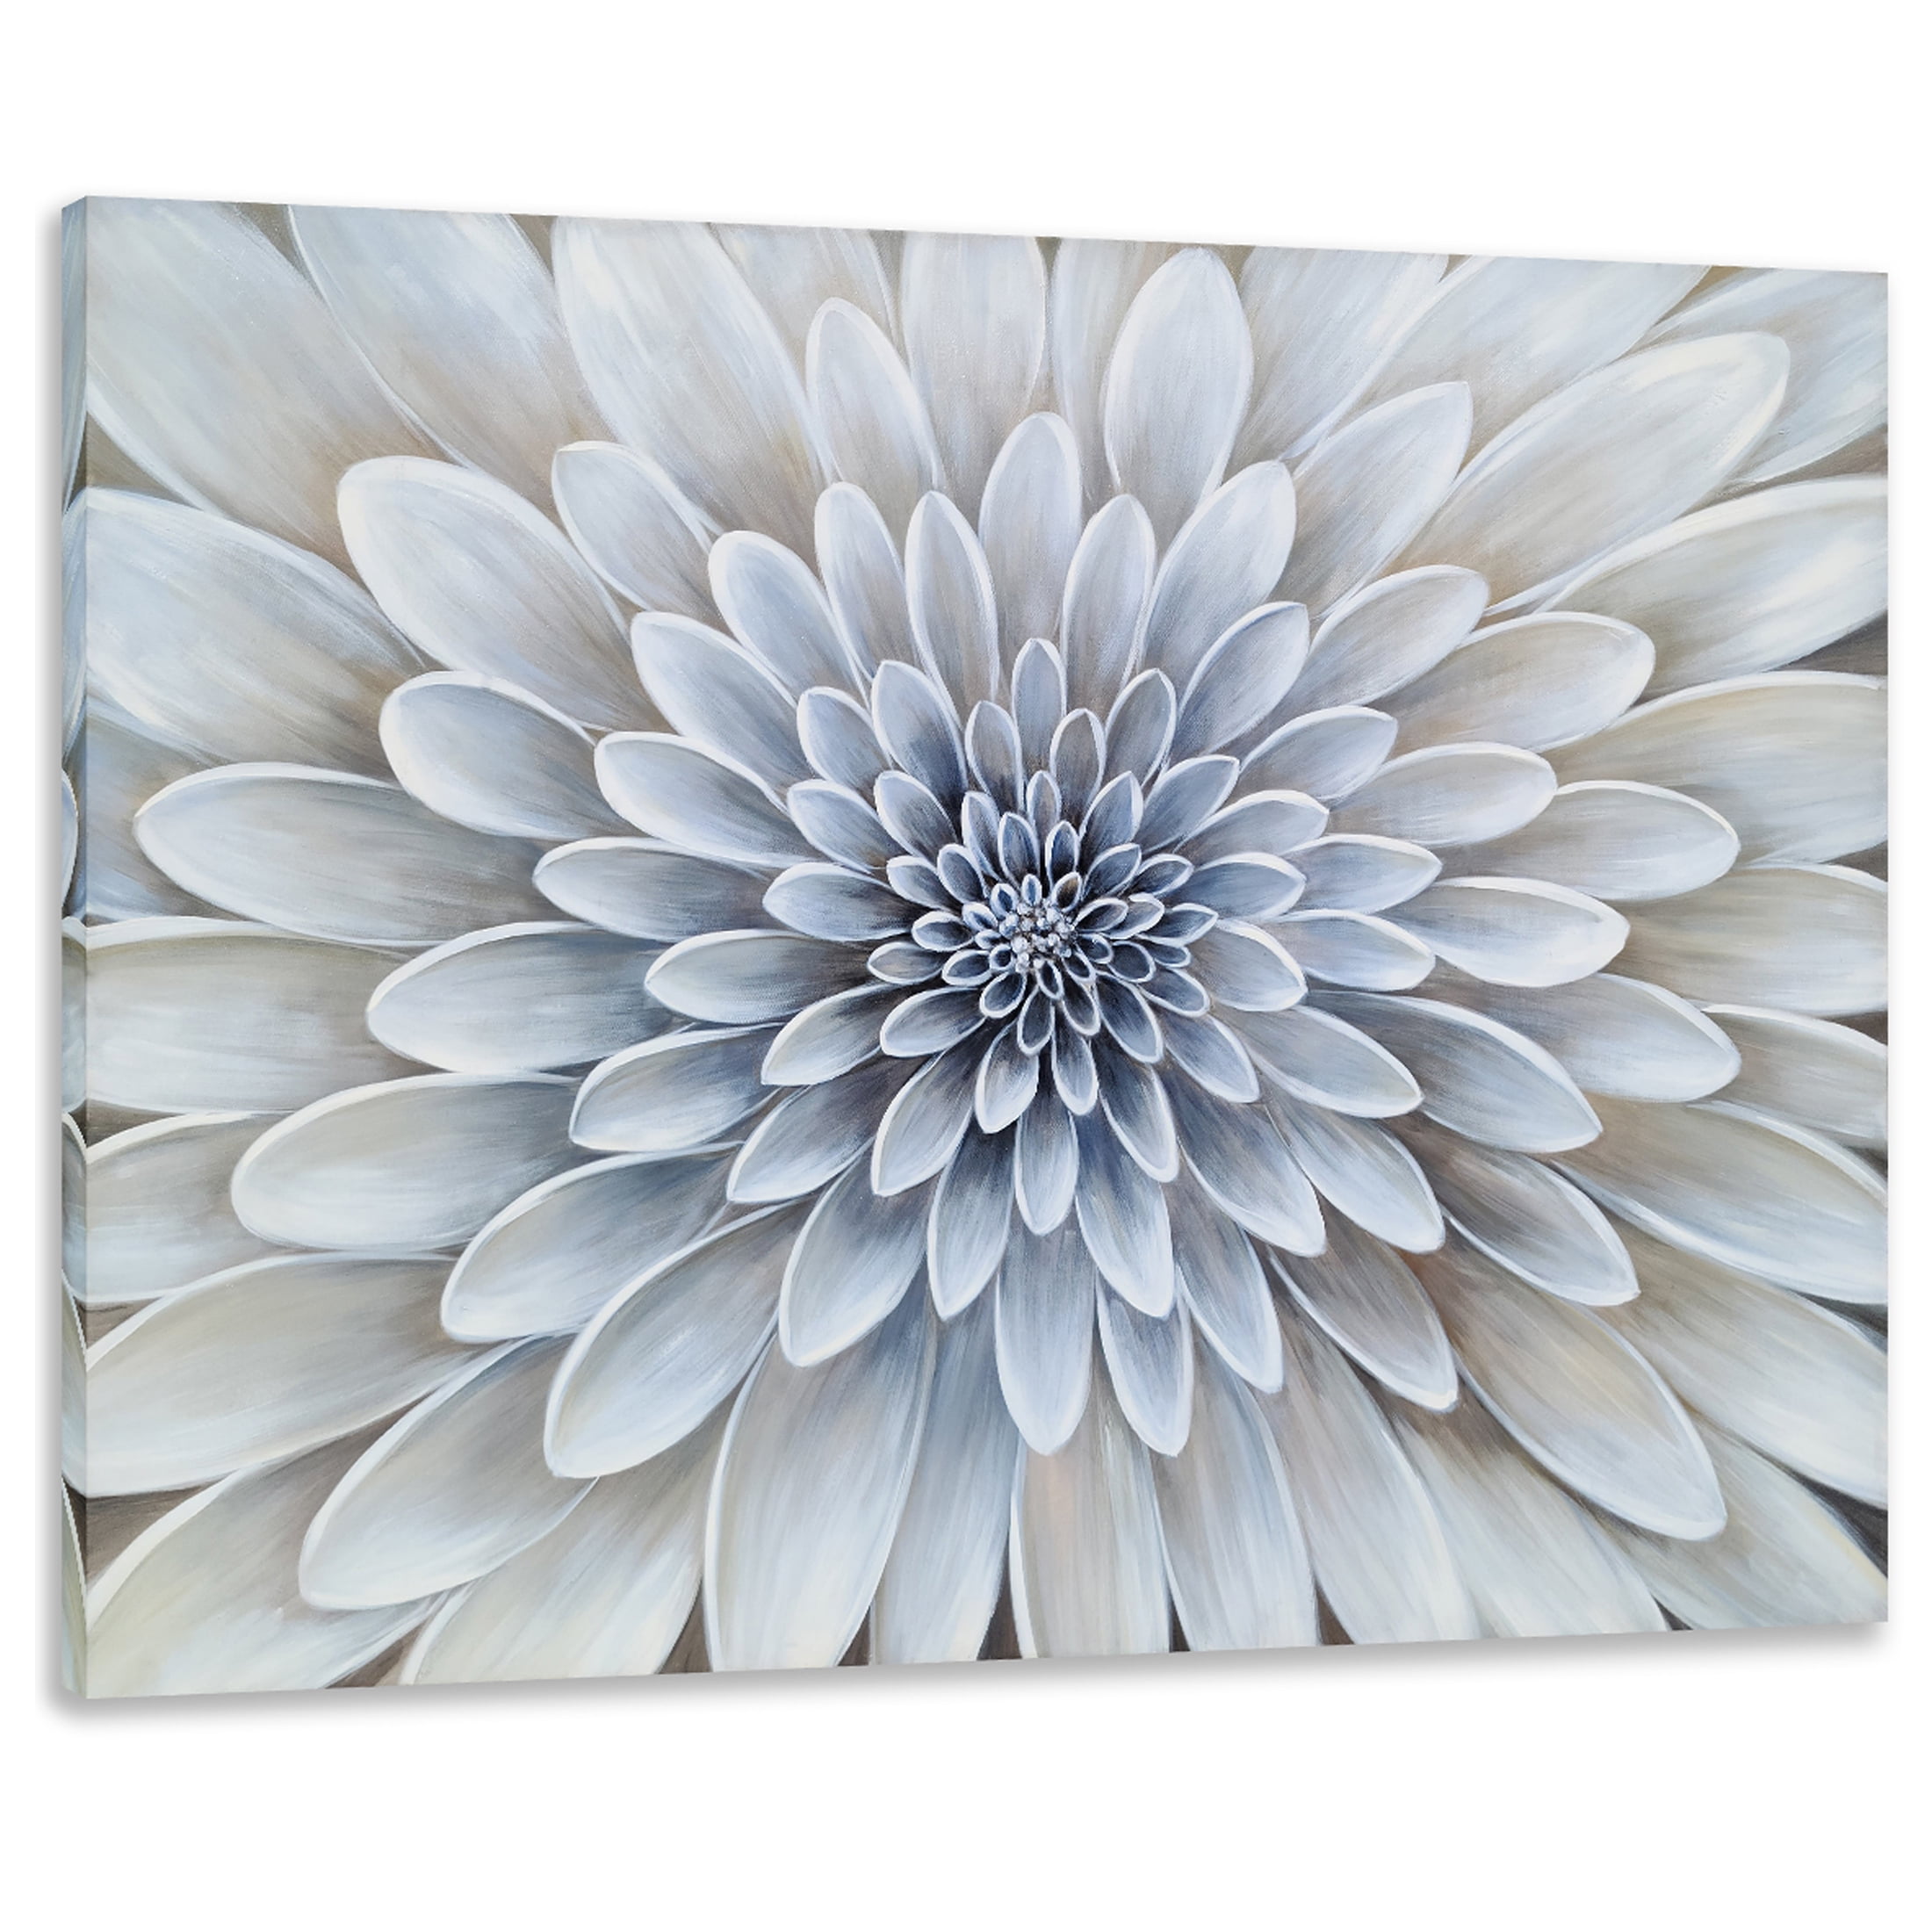 SYGALLERIER Floral Canvas Wall Art with Textured Modern Abstract White ...